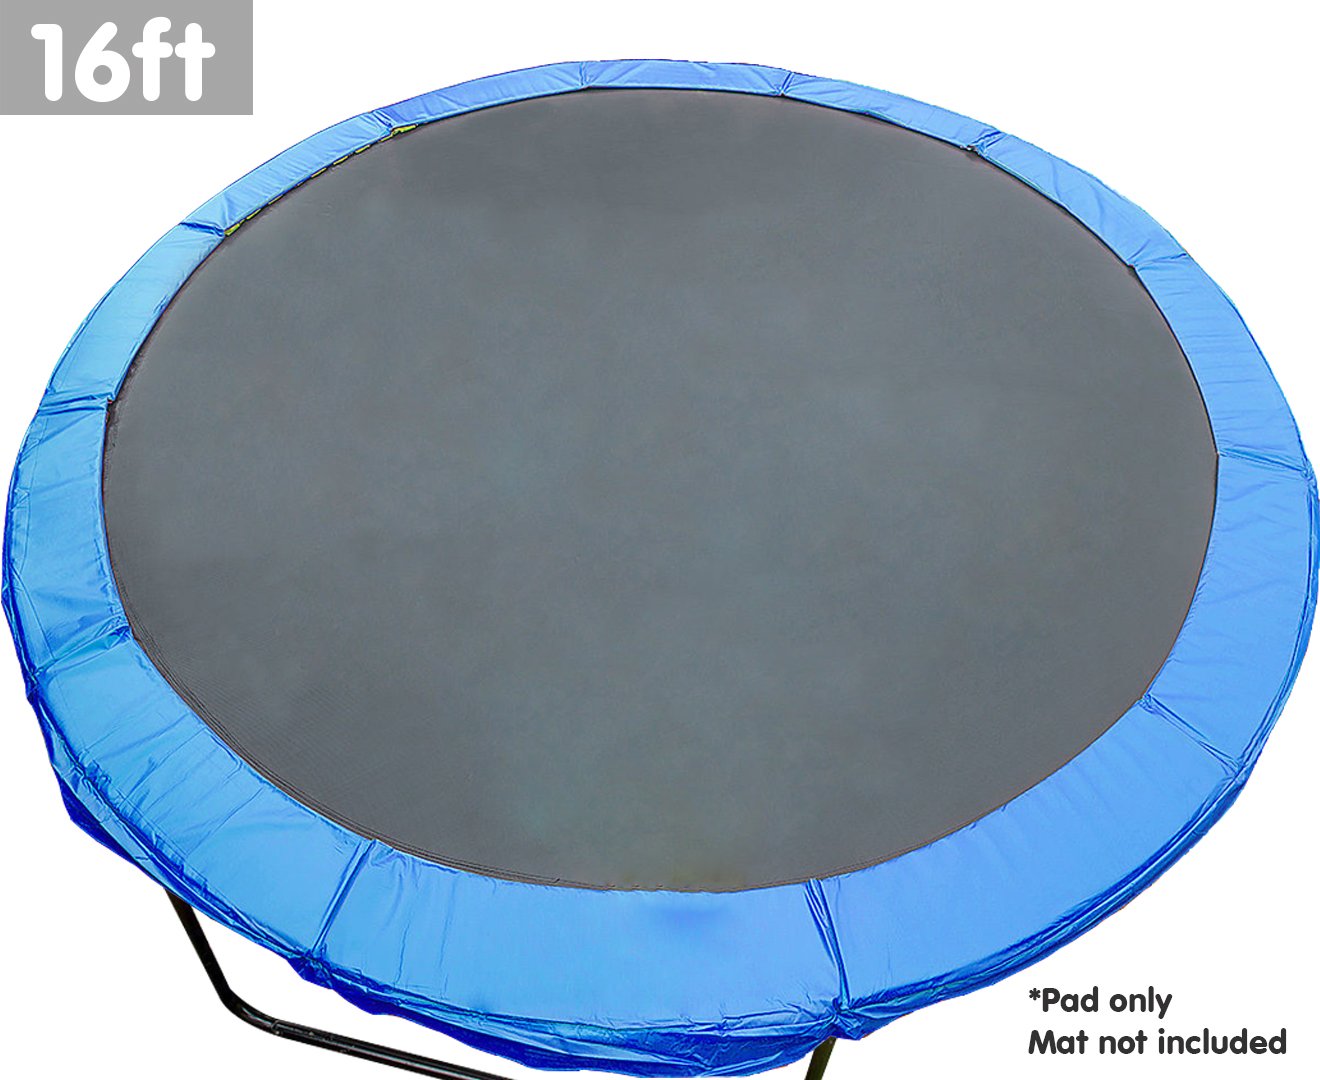 Kahuna 8ft Replacement Reinforced Outdoor Round Trampoline Safety Spring Pad Cover (16 Feet) | Auzzi Store